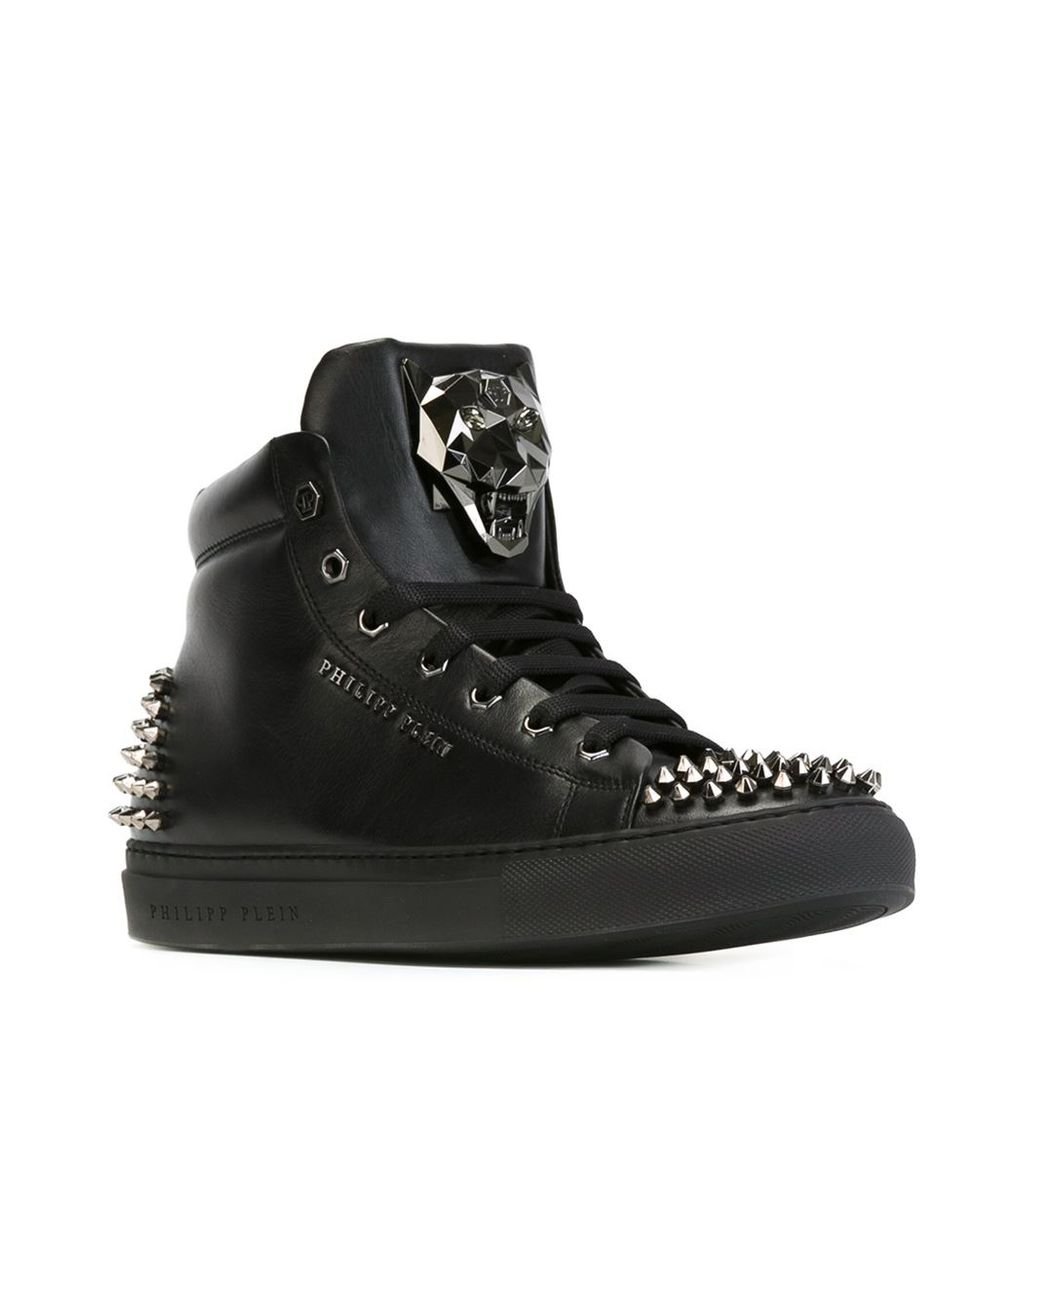 Philipp Plein Spike-Studded Leather High-Top Sneakers in Black for Men |  Lyst